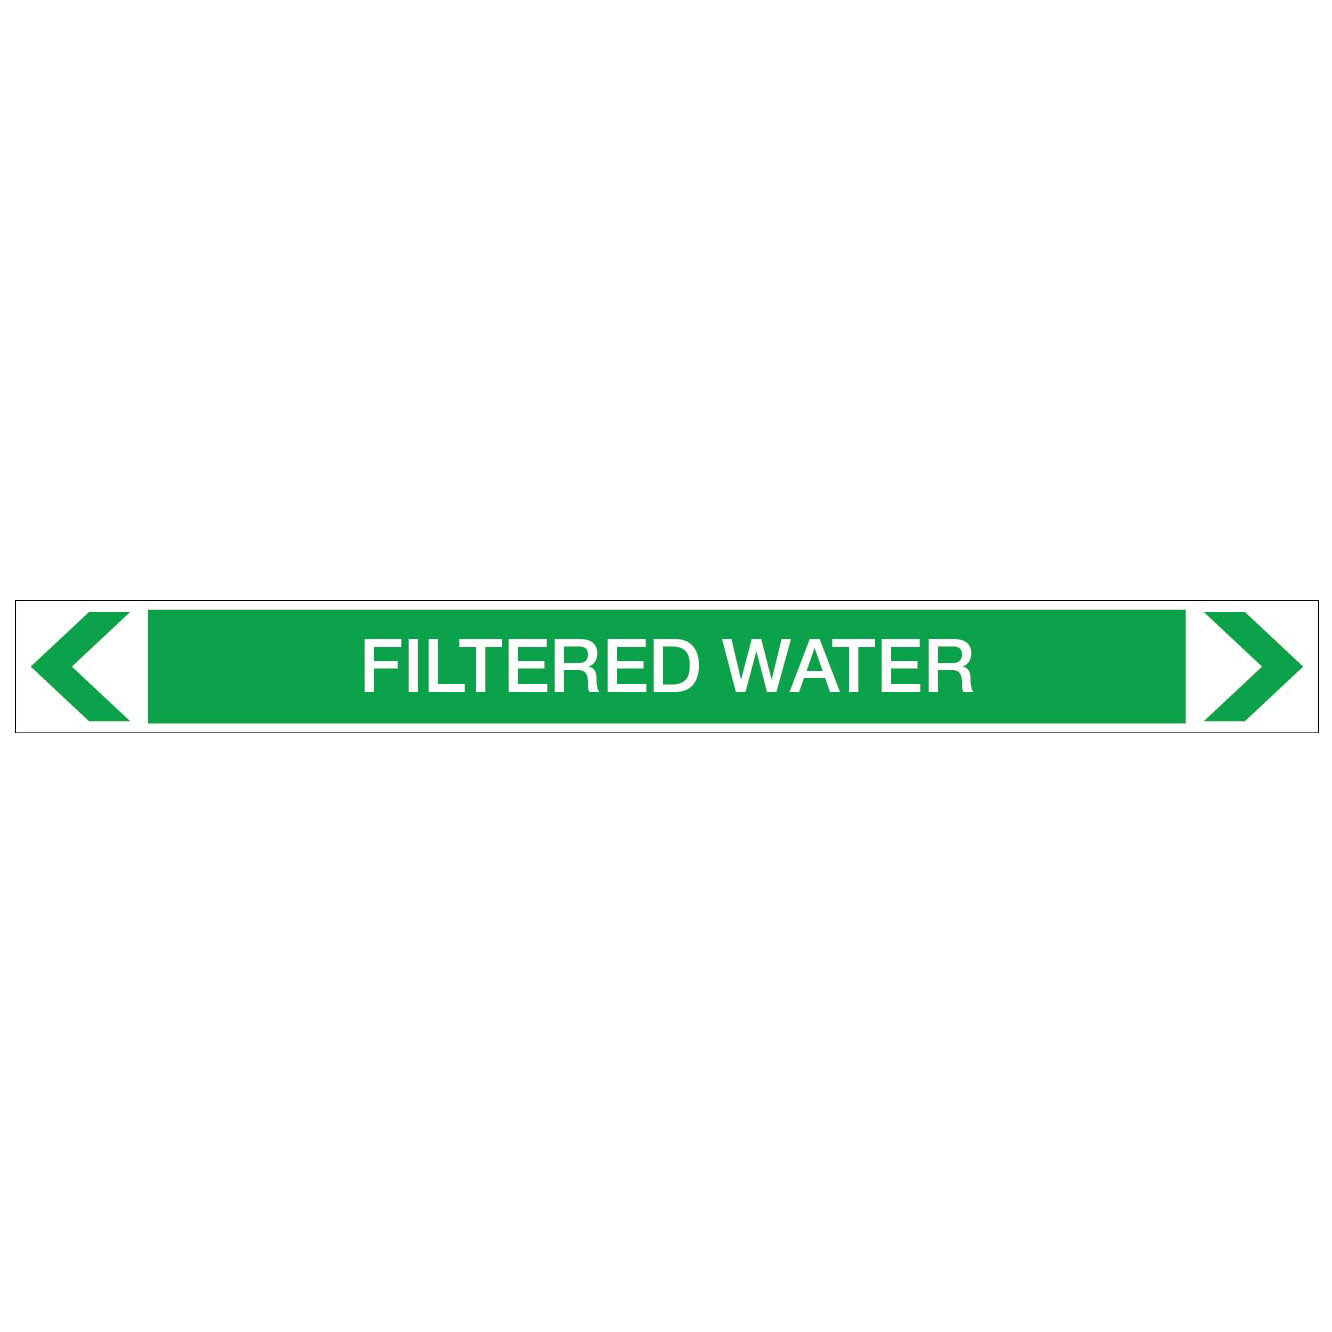 Water - Filtered Water - Pipe Marker Sticker